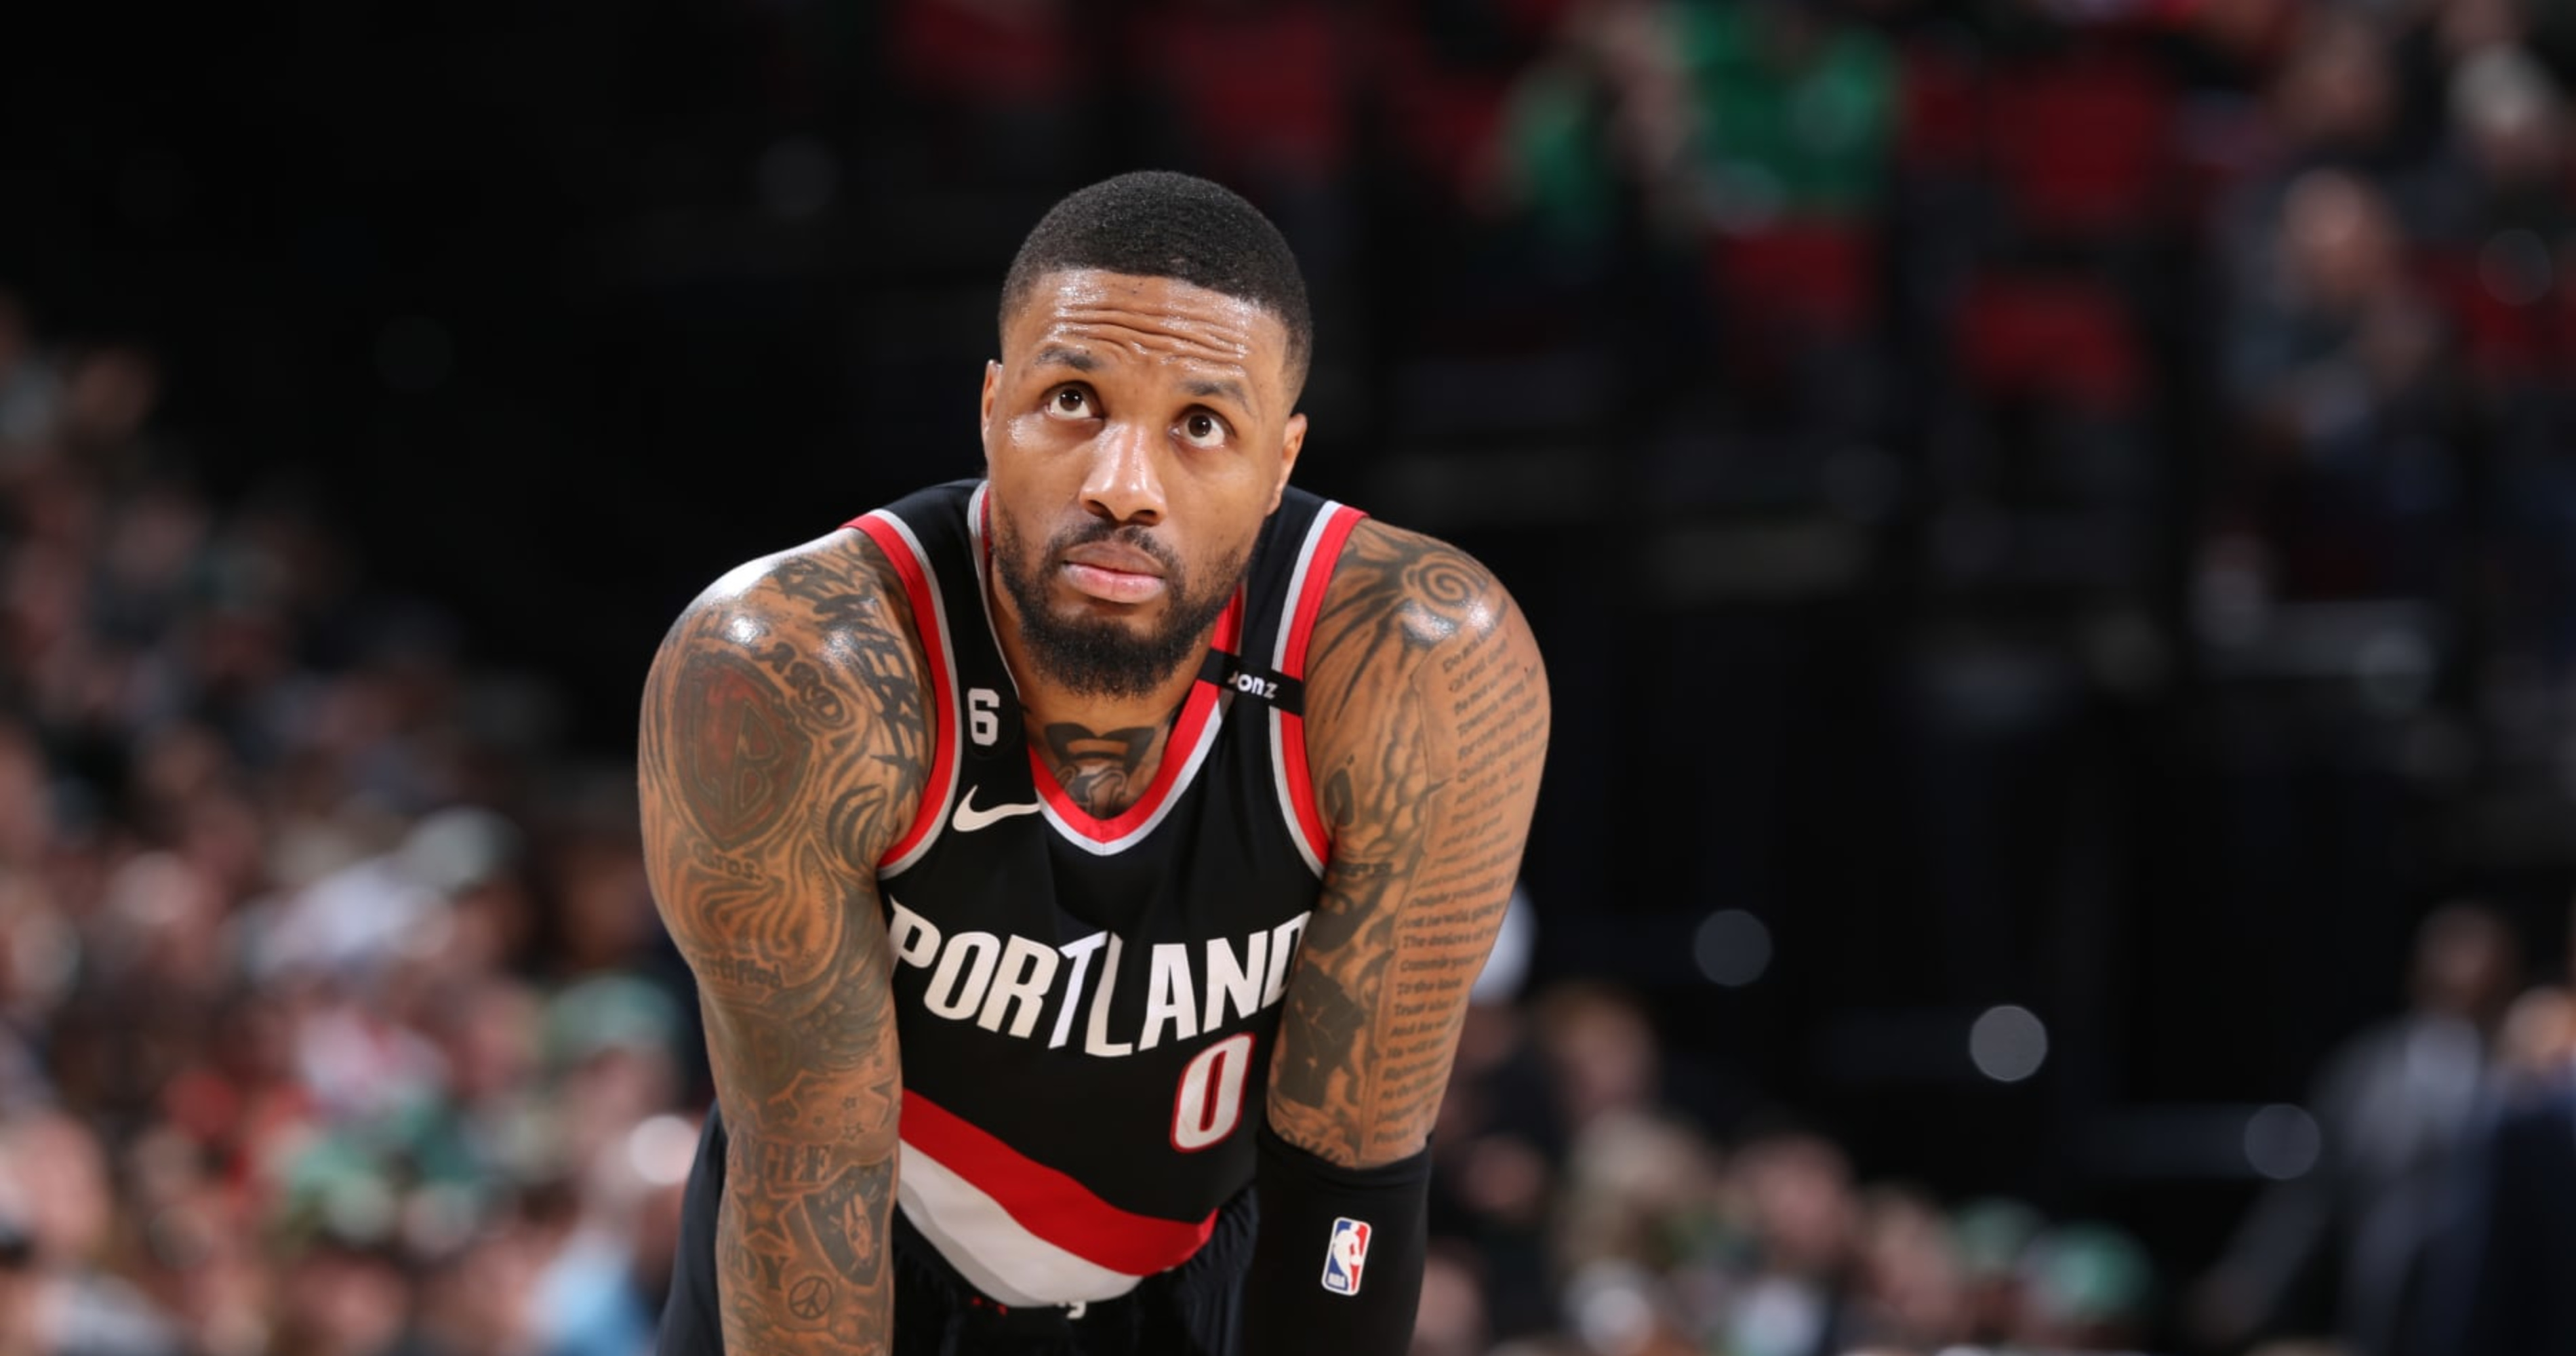 Damian Lillard of the Portland Trail Blazers exchanges jerseys with News  Photo - Getty Images